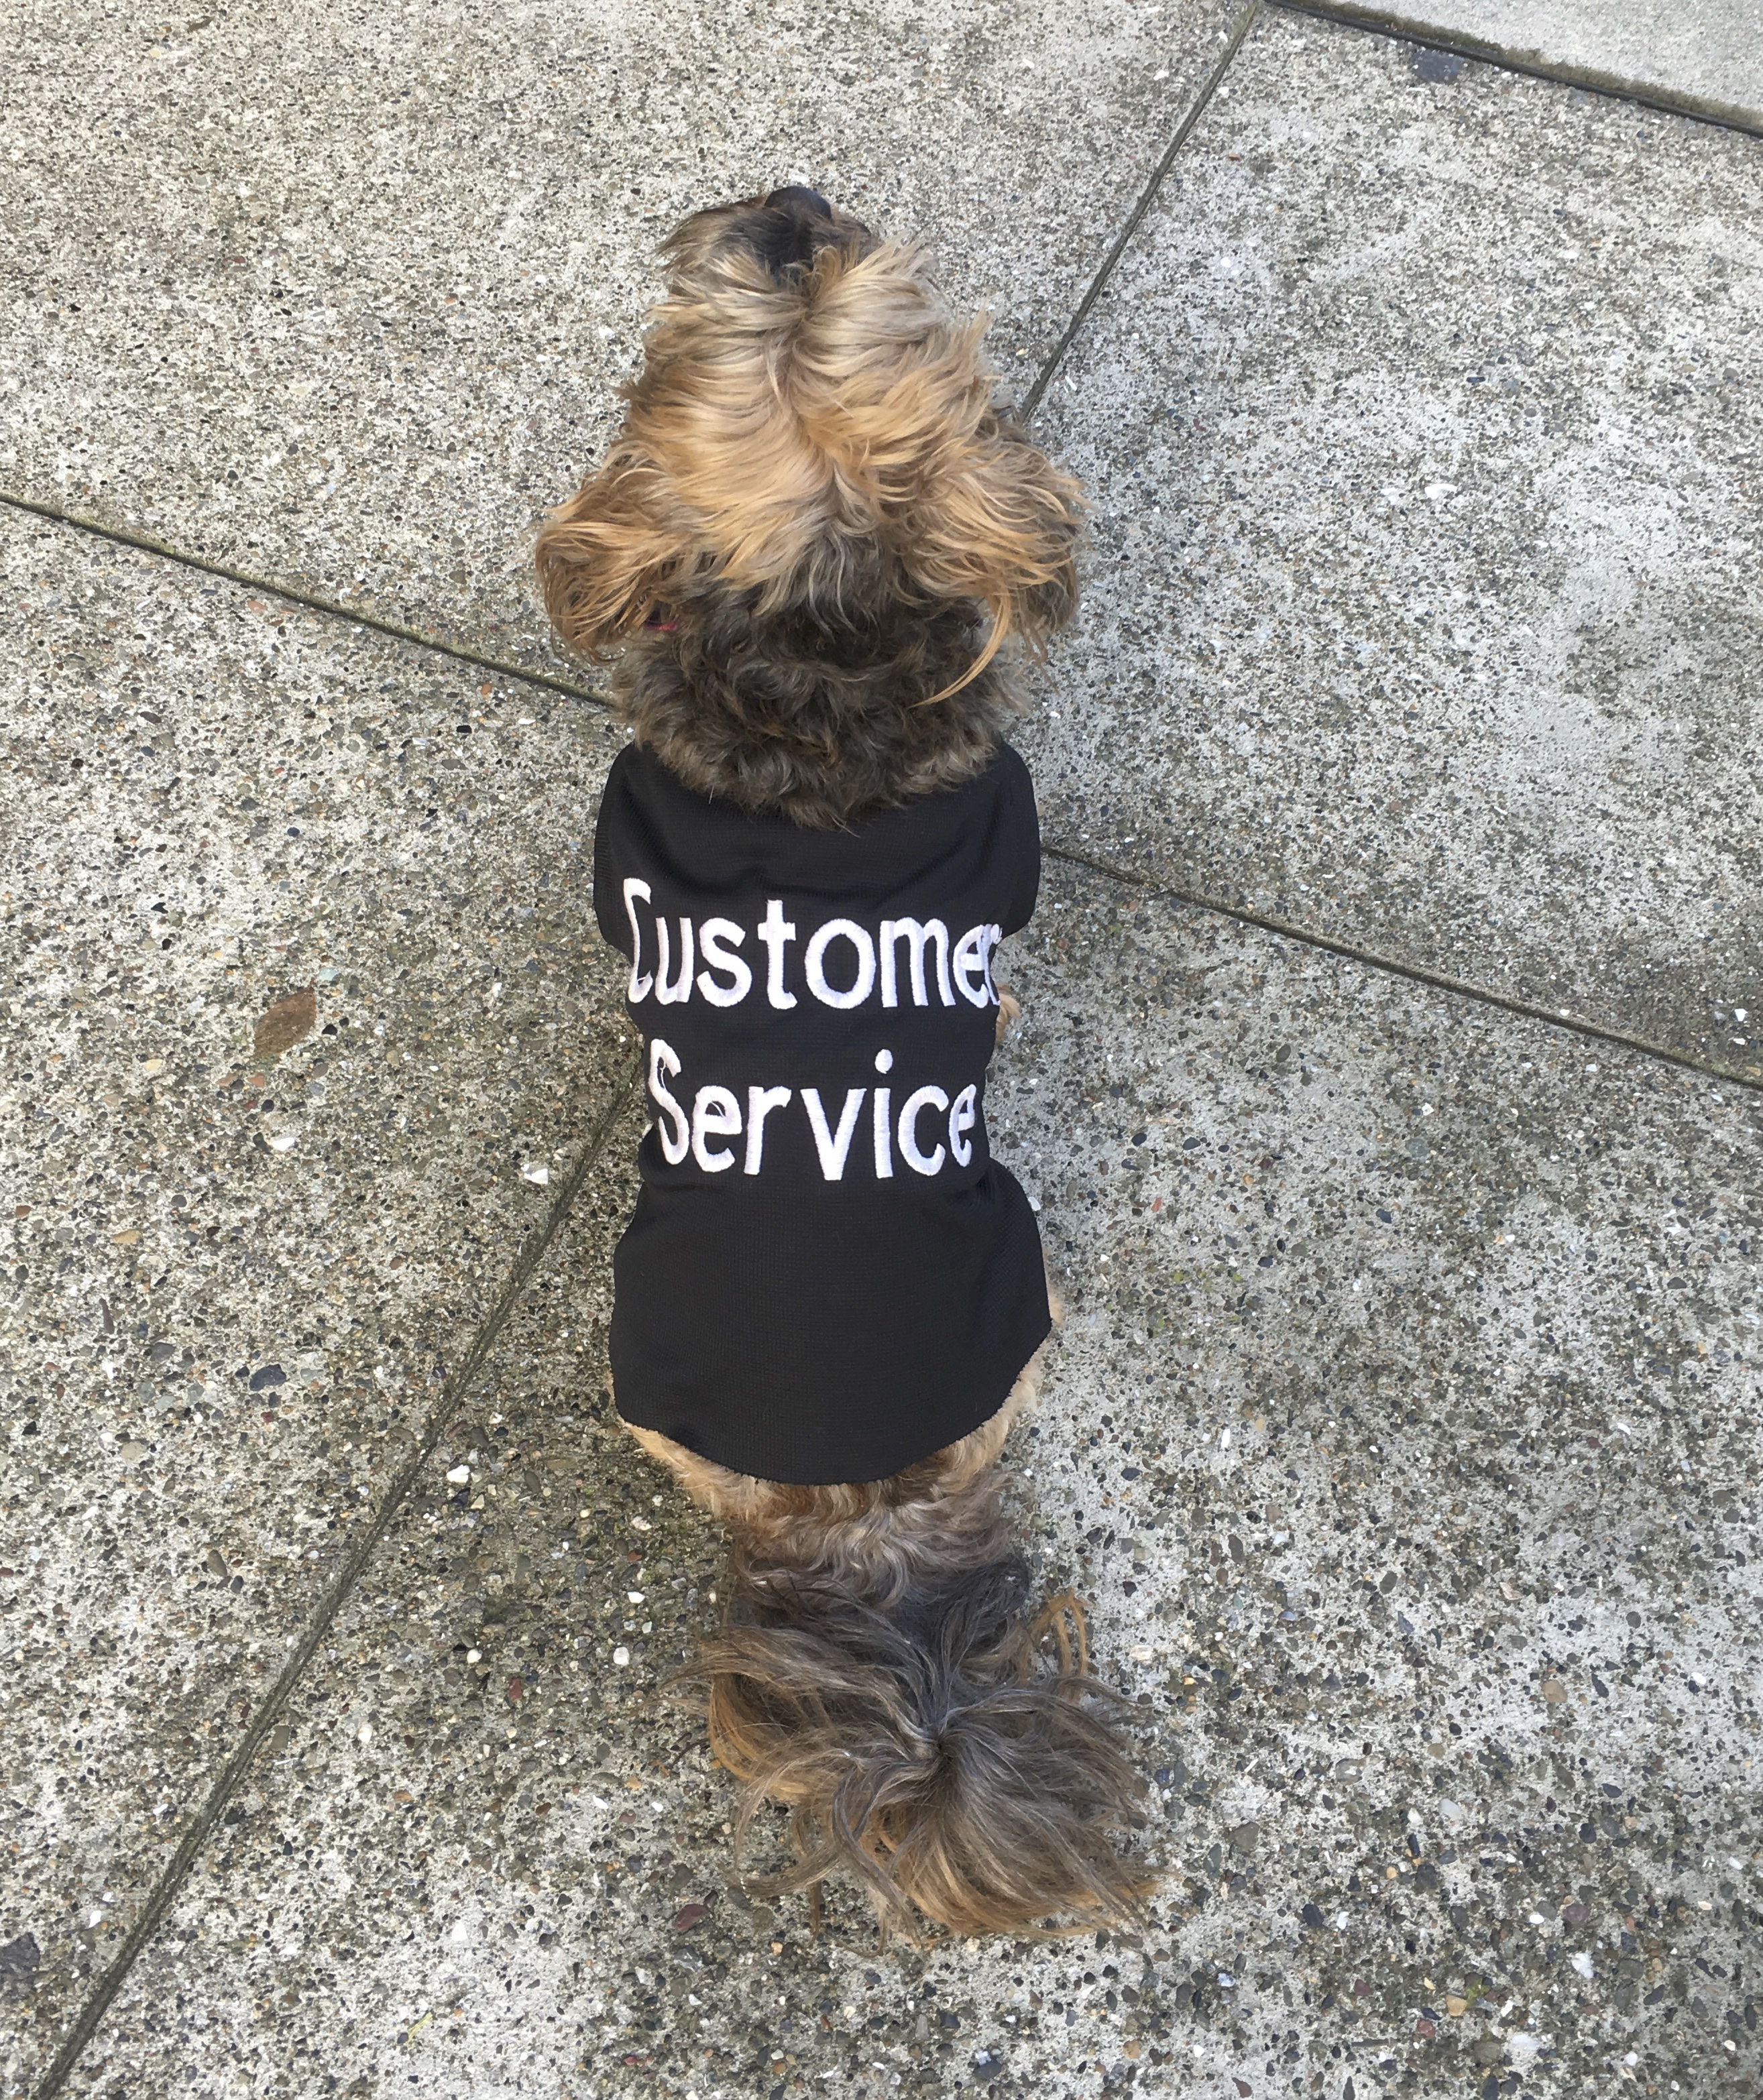 Yorkshire Terrier Shih Tzu Mix Wearing A Shirt That Says Customer Service